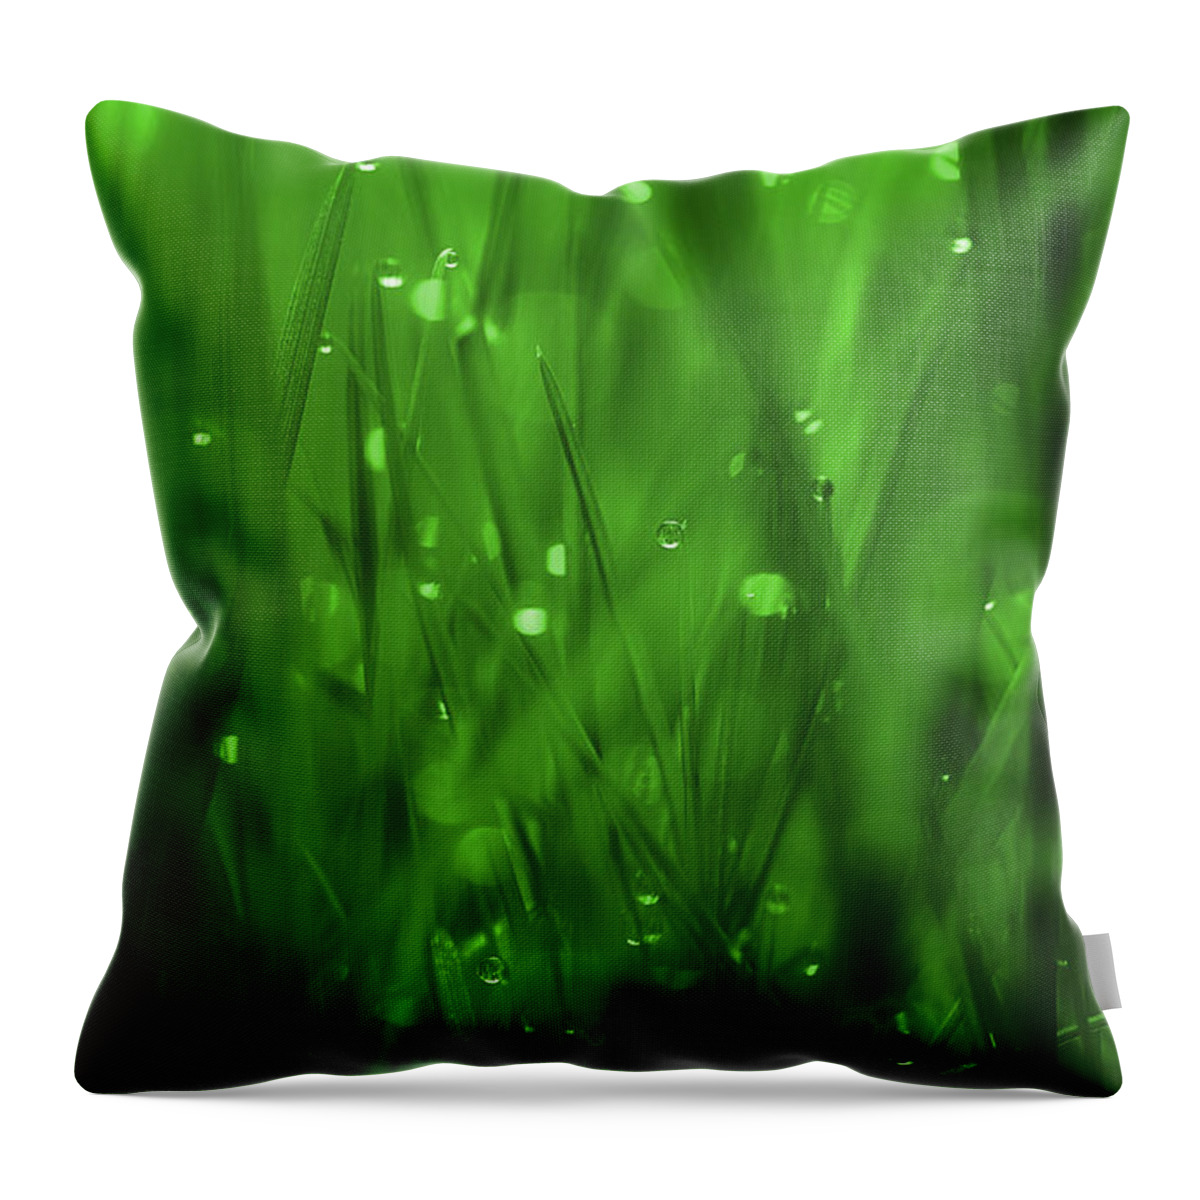 Grass Throw Pillow featuring the photograph Where Dreams Begin by Michael Eingle